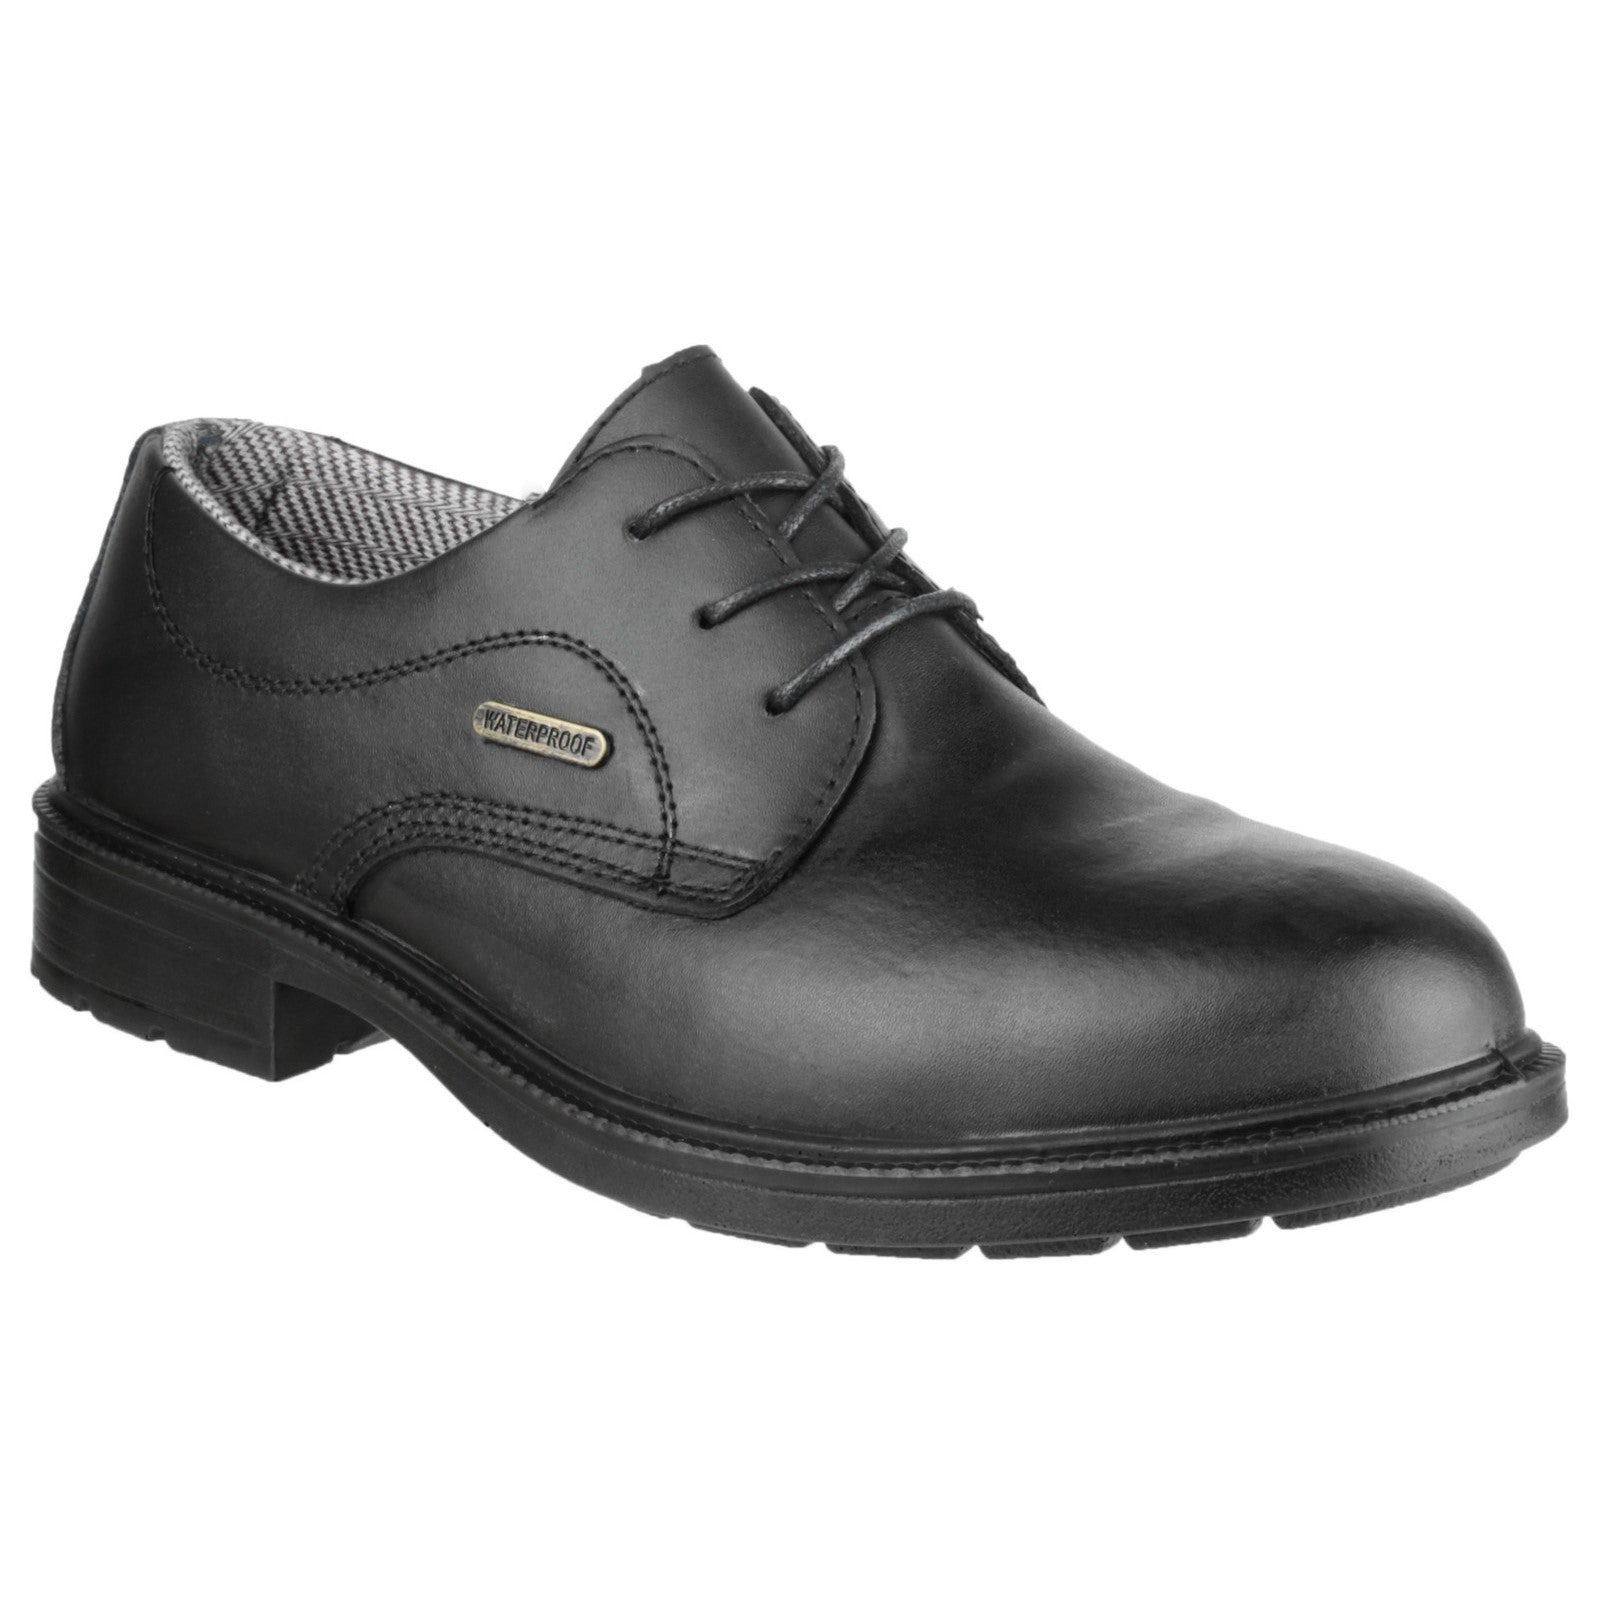 Amblers FS62 Gibson Safety Shoe